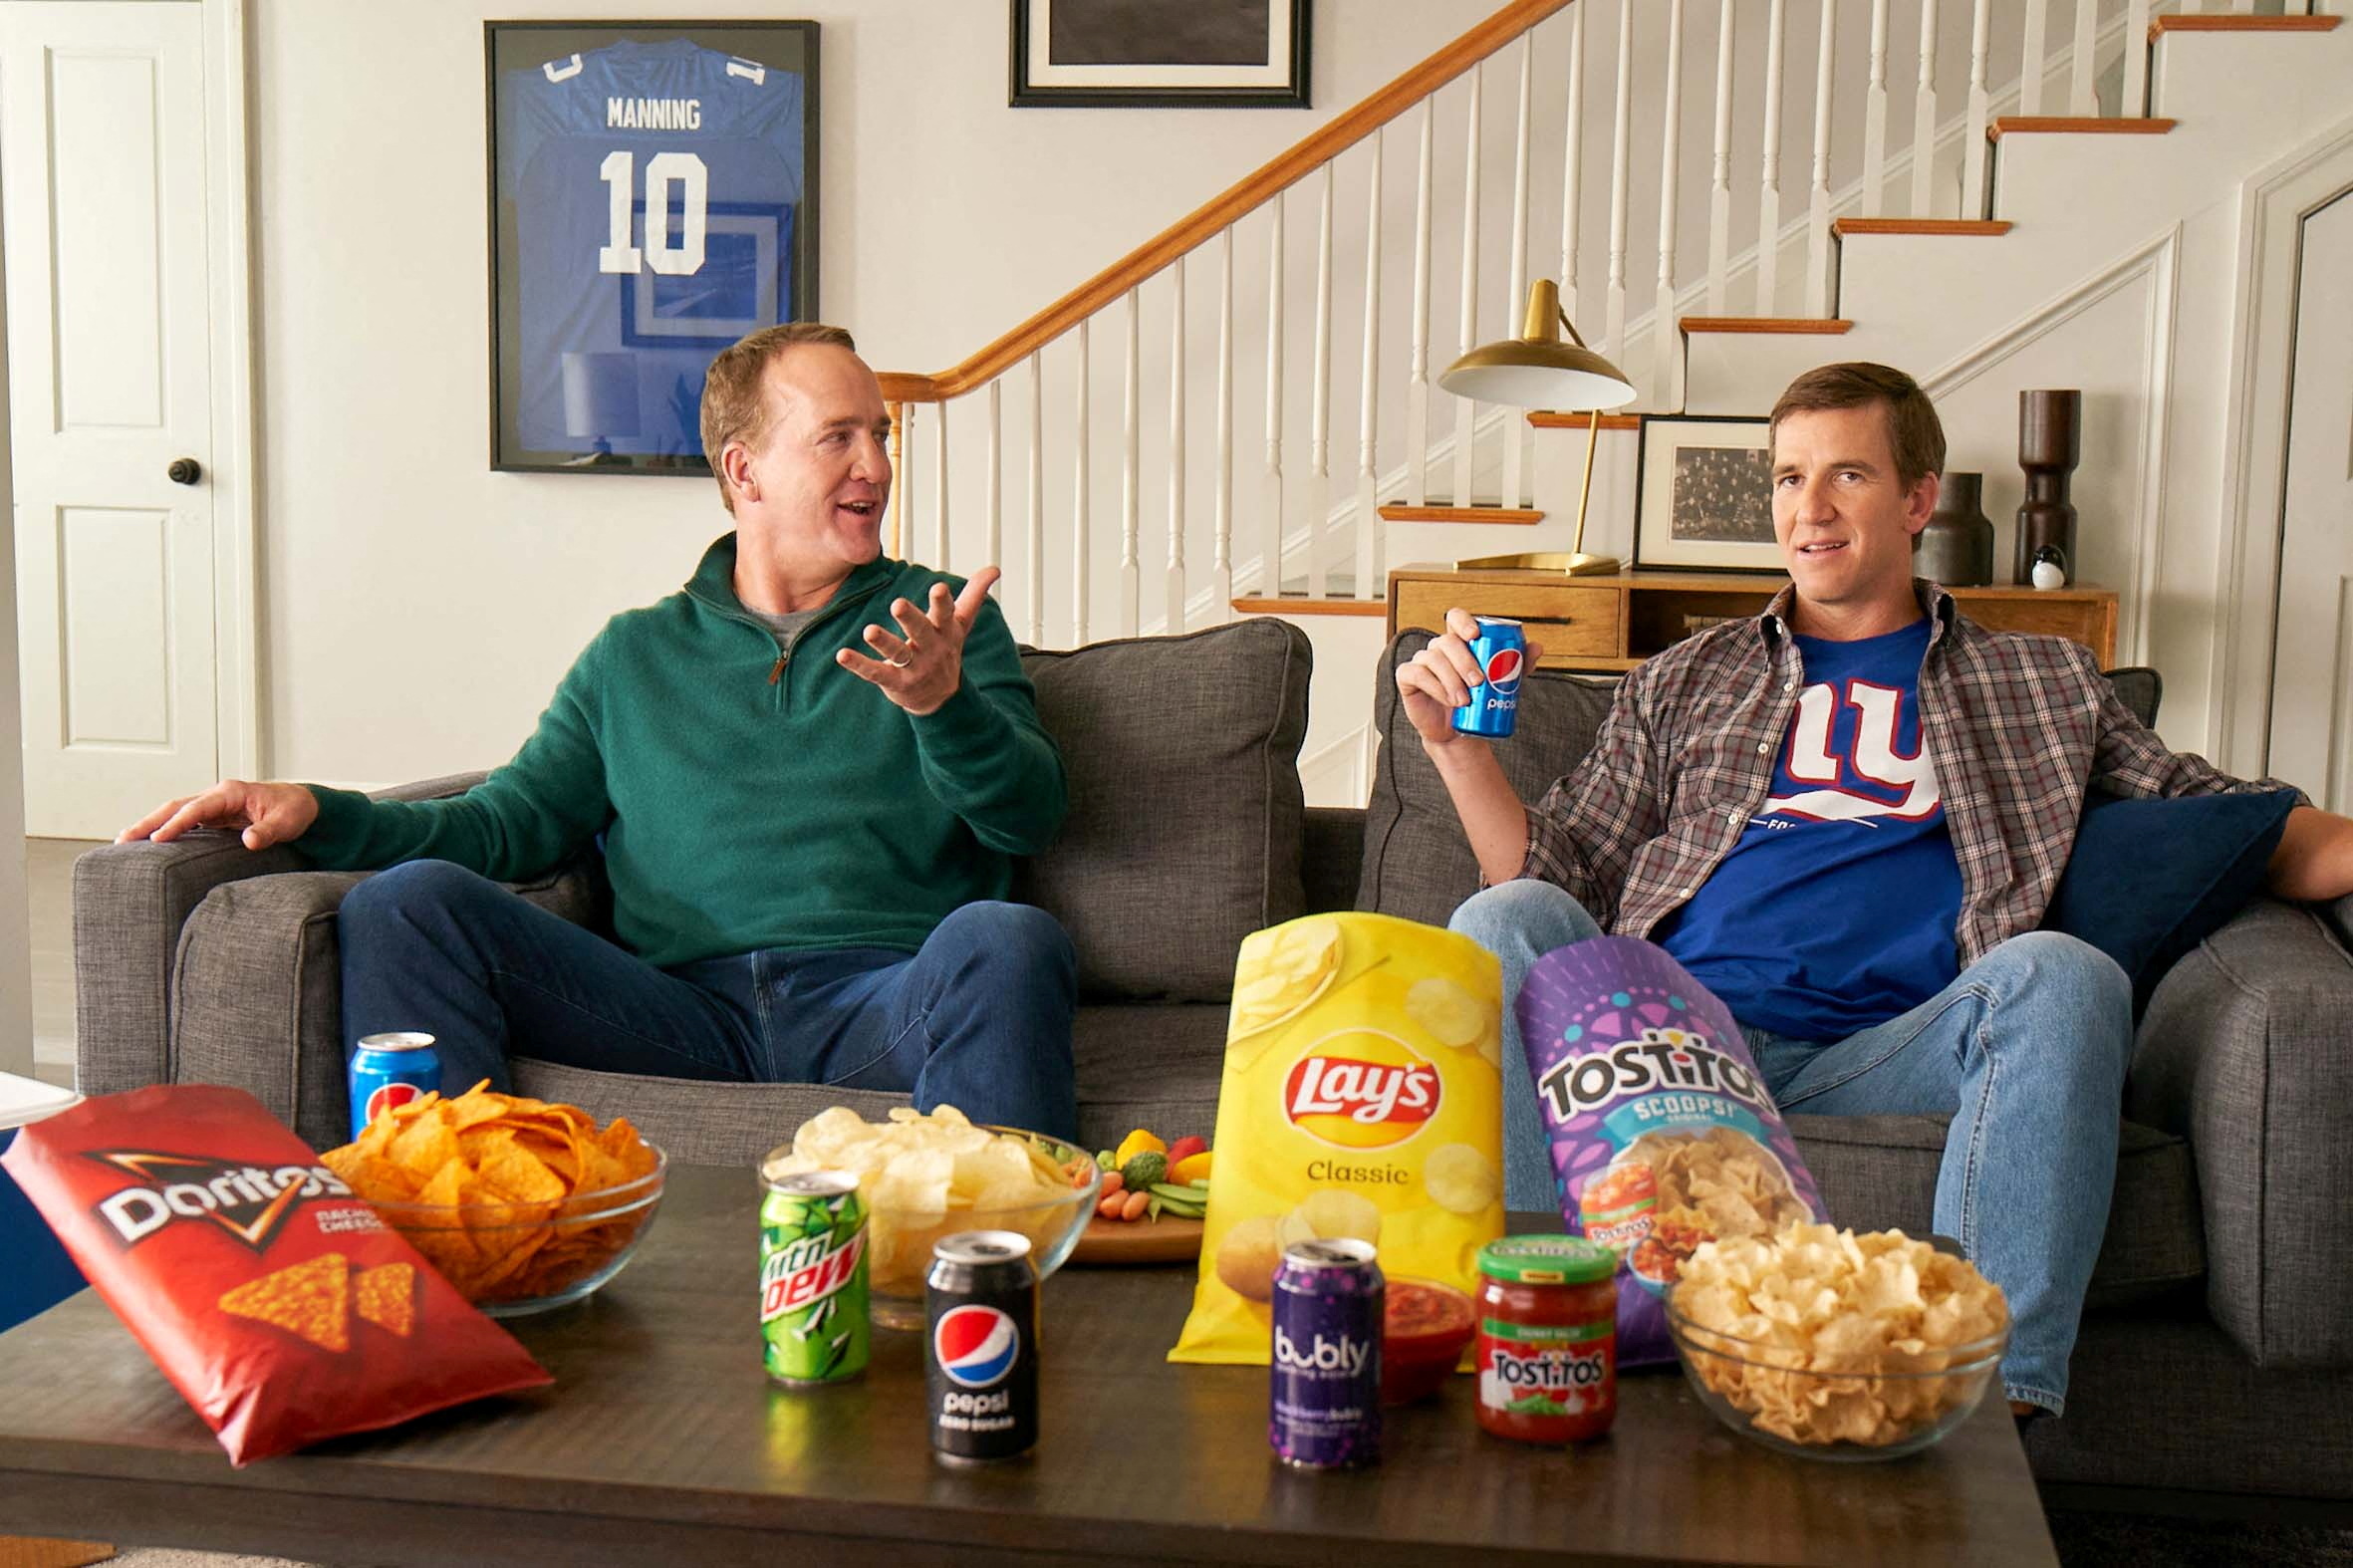 Eli Manning features in an NFL post-season ad campaign for Frito-Lay and PepsiCo